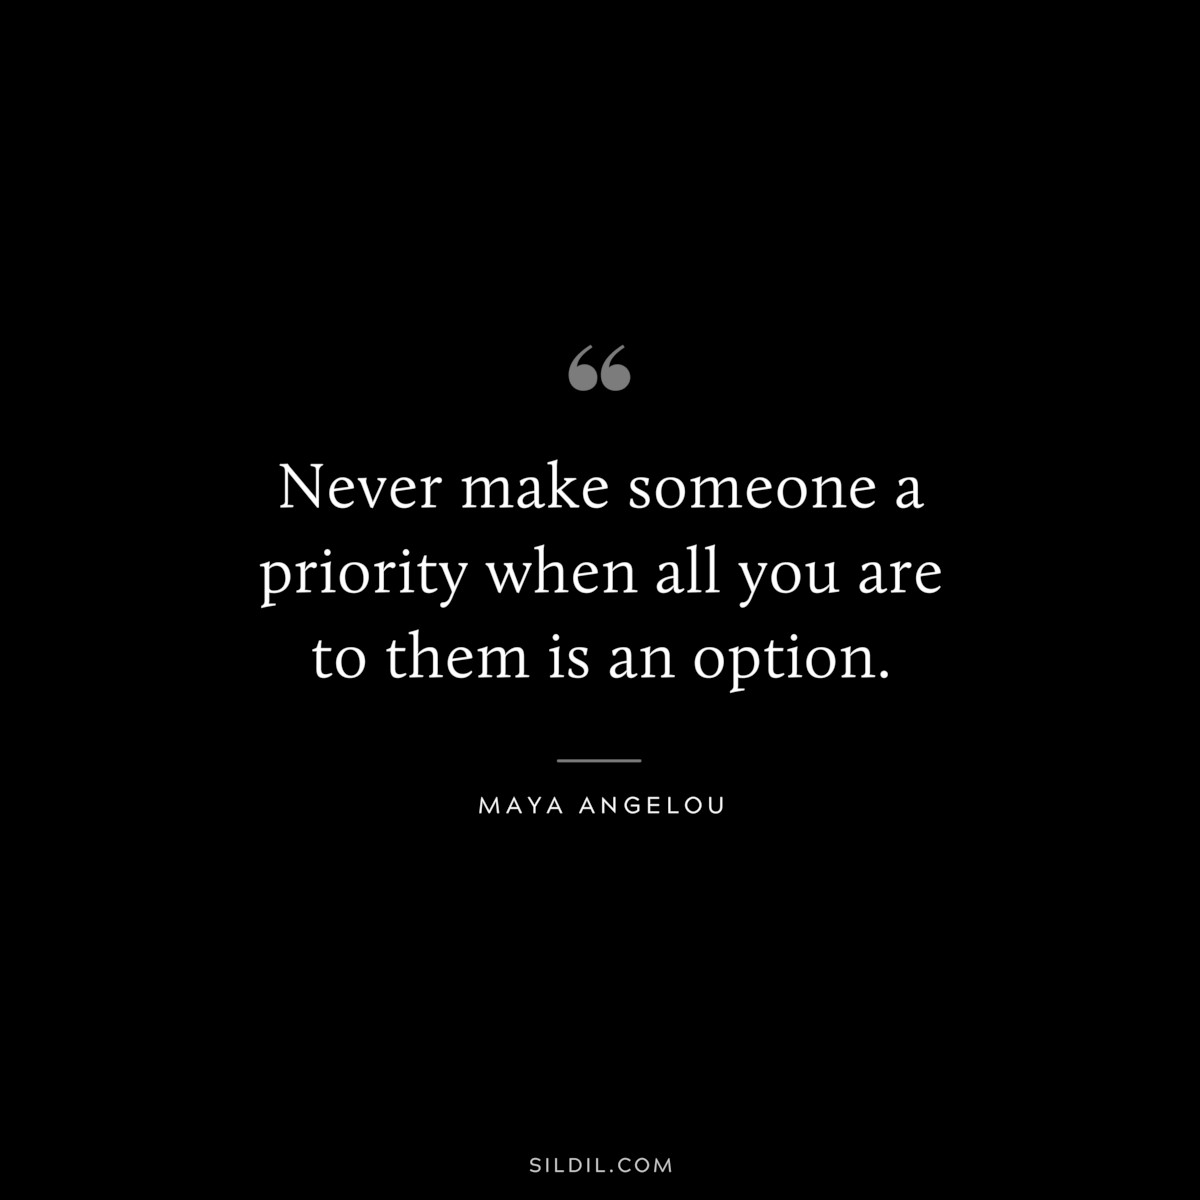 Never make someone a priority when all you are to them is an option. ― Maya Angelou